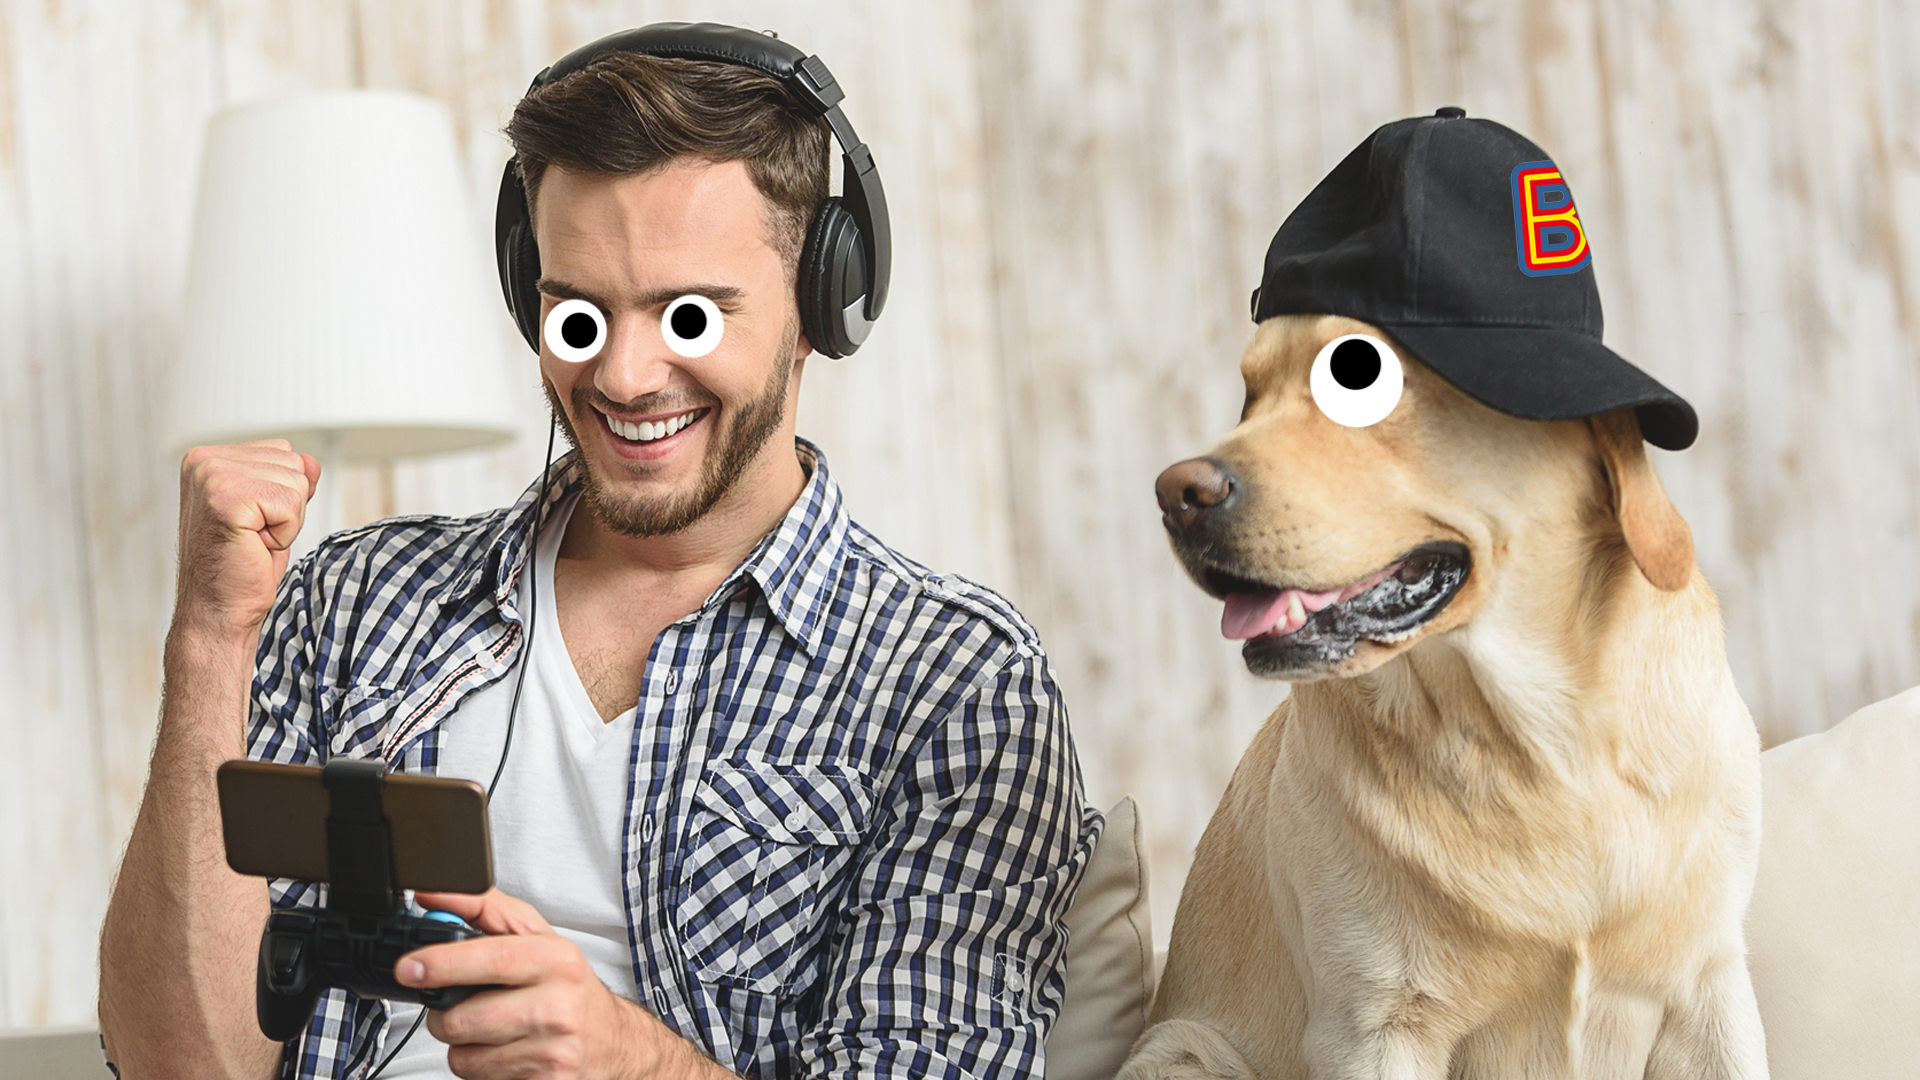 A man and his pet dog watching something on a phone